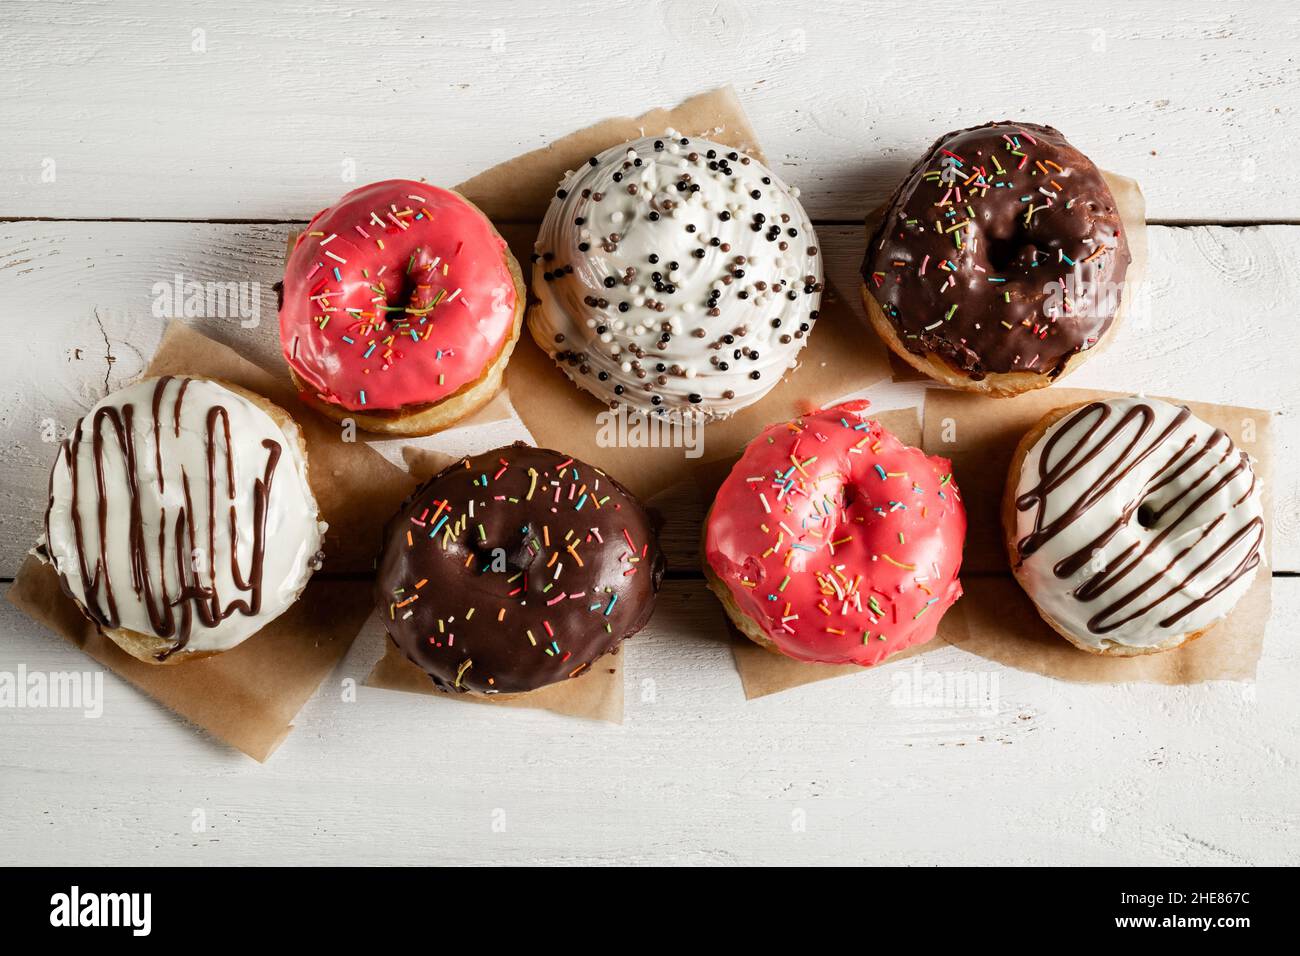 Delicious donuts with icing on a white wooden background. Stock Photo